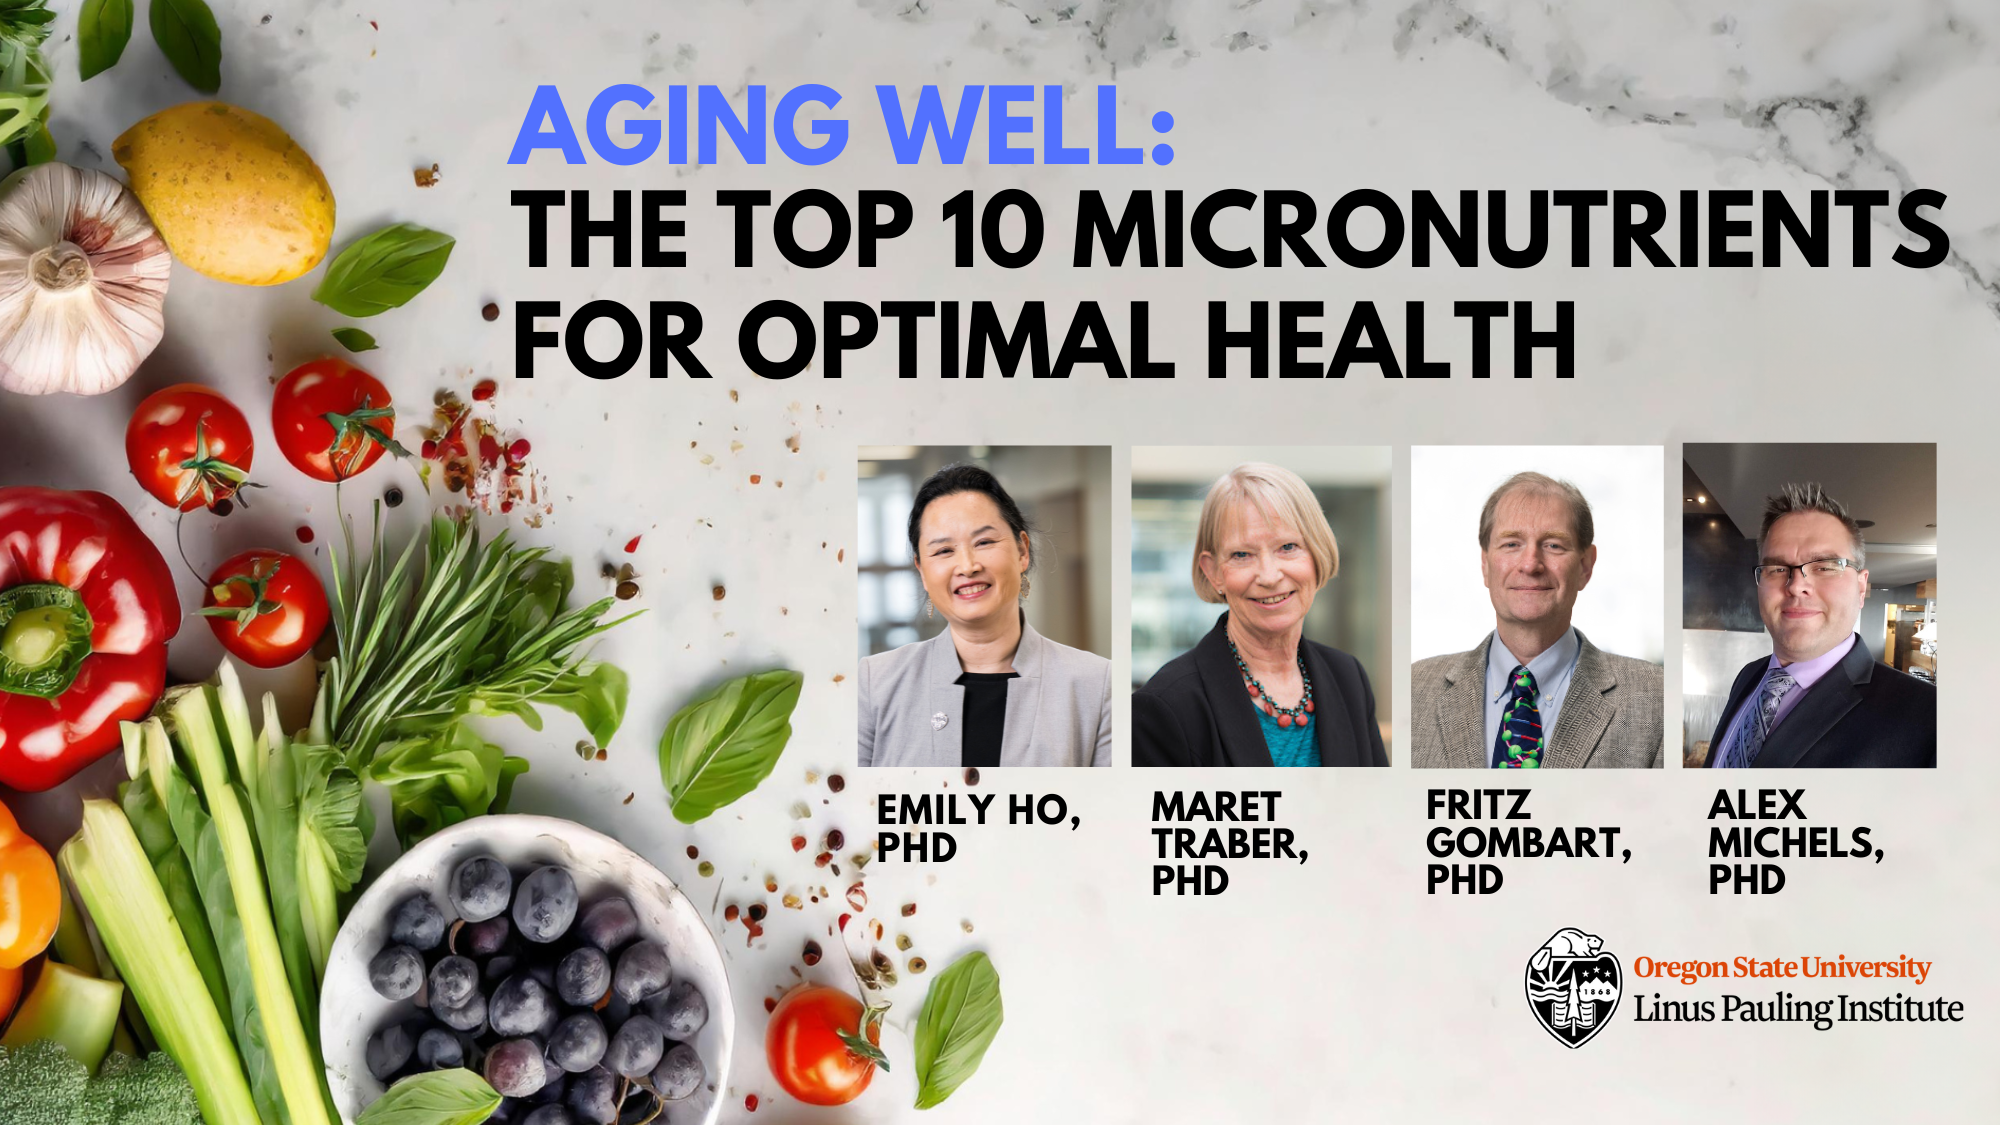 Aging Well: The Top 10 Micronutrients for Optimal Health